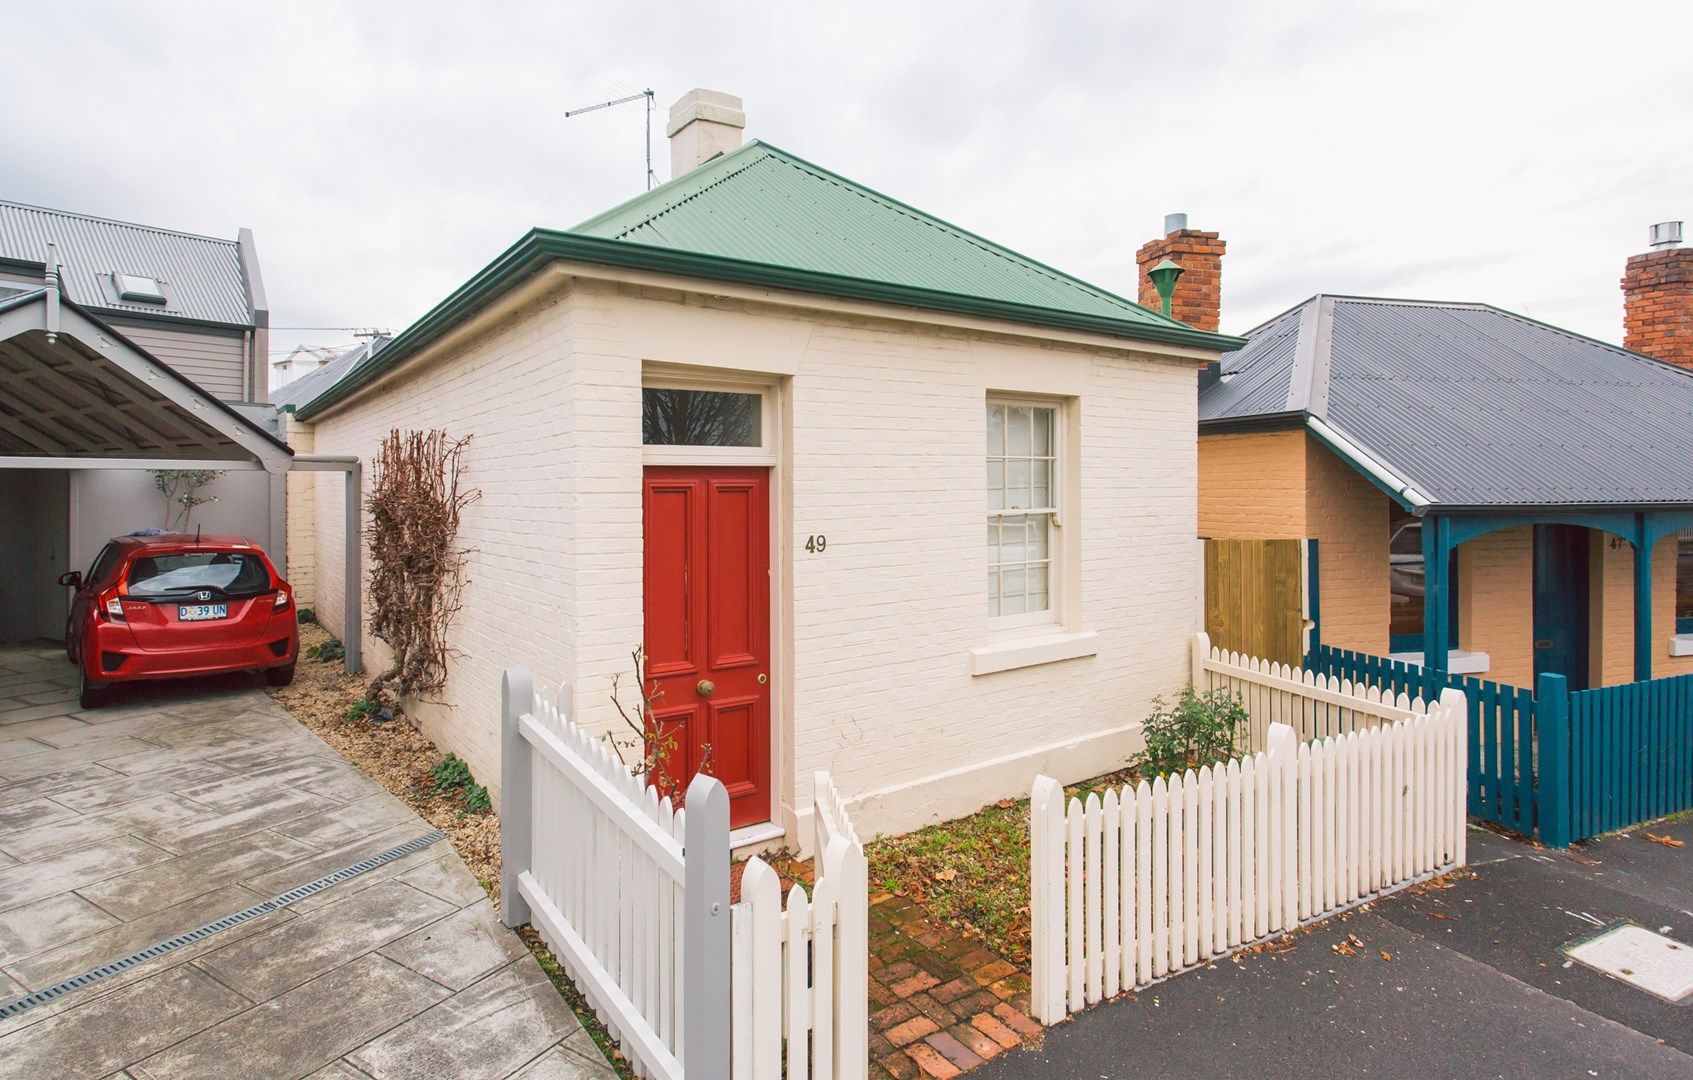 2 bedrooms Townhouse in 49 Runnymede Street BATTERY POINT TAS, 7004